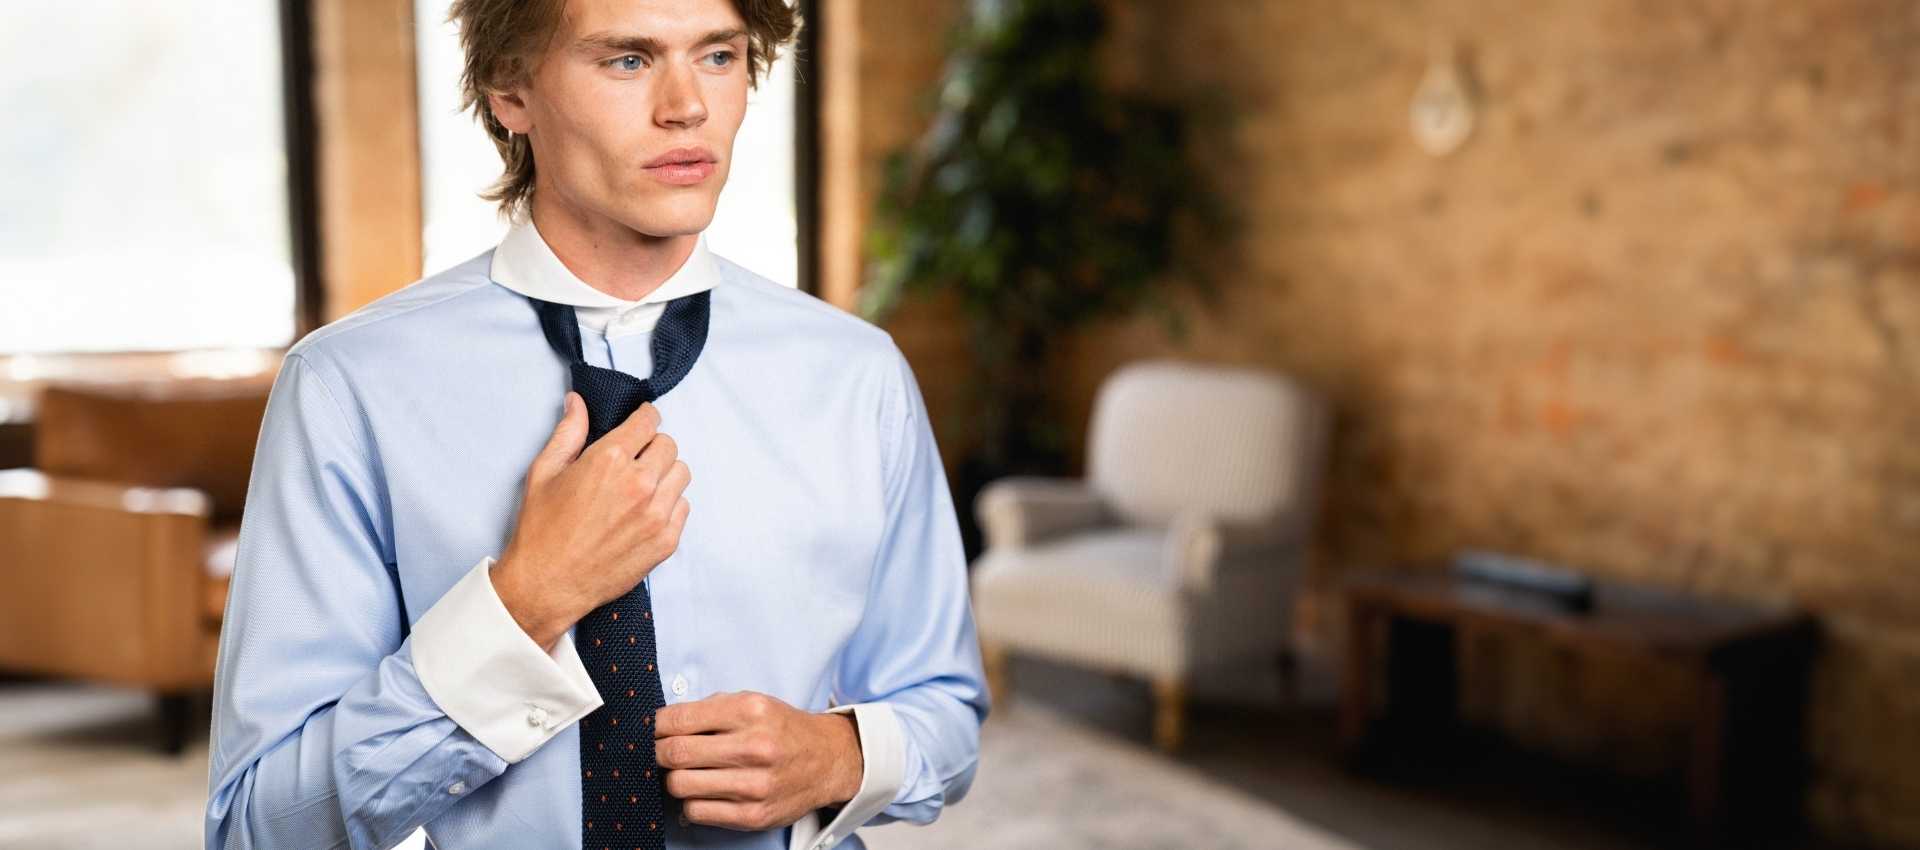 Shirts with Contrast Collar for Men from Dandy & Son. Image of a man wearing a Extreme Cutaway Contrast Collar Shirt from Dandy & Son.